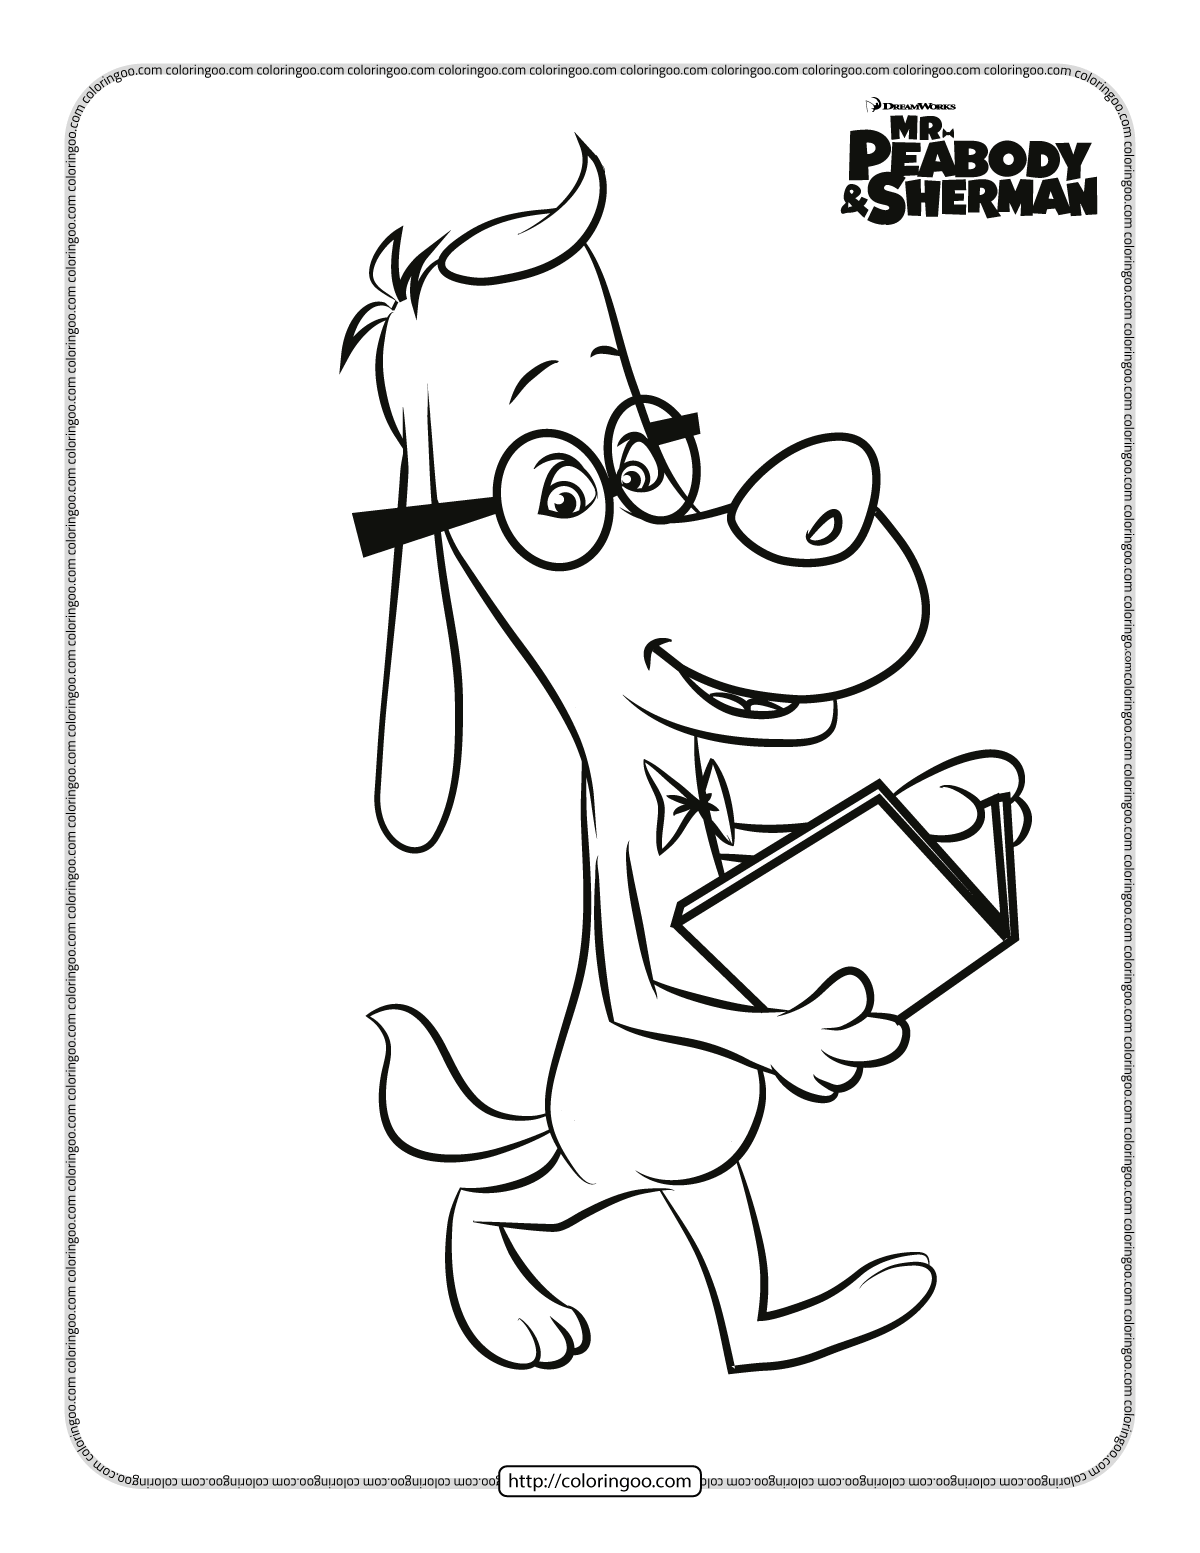 printable mr peabody coloring pages